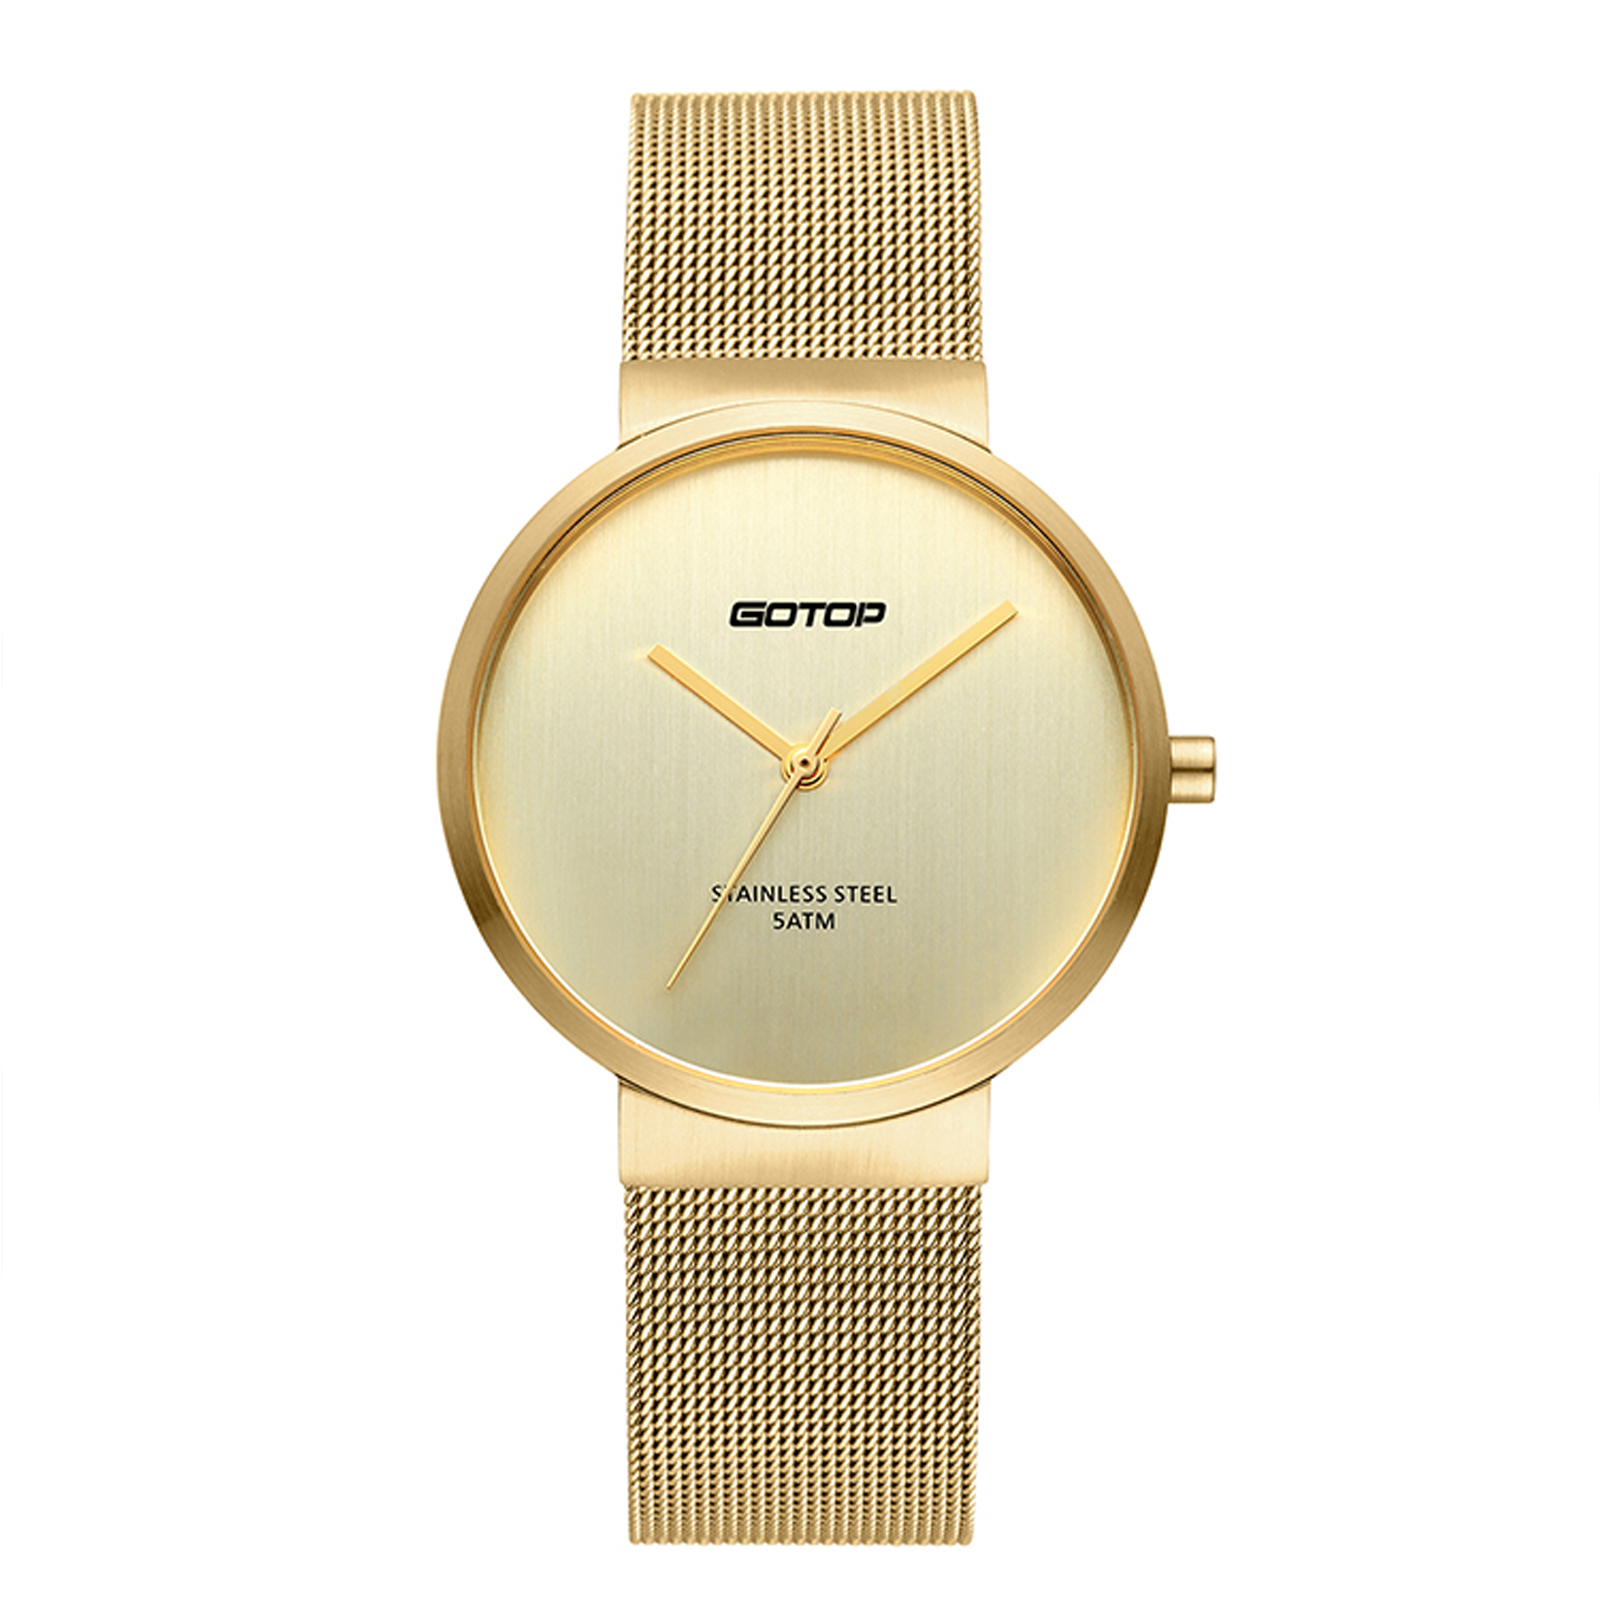 All Gold Women's Watch With Mesh Band And Slim Bezel